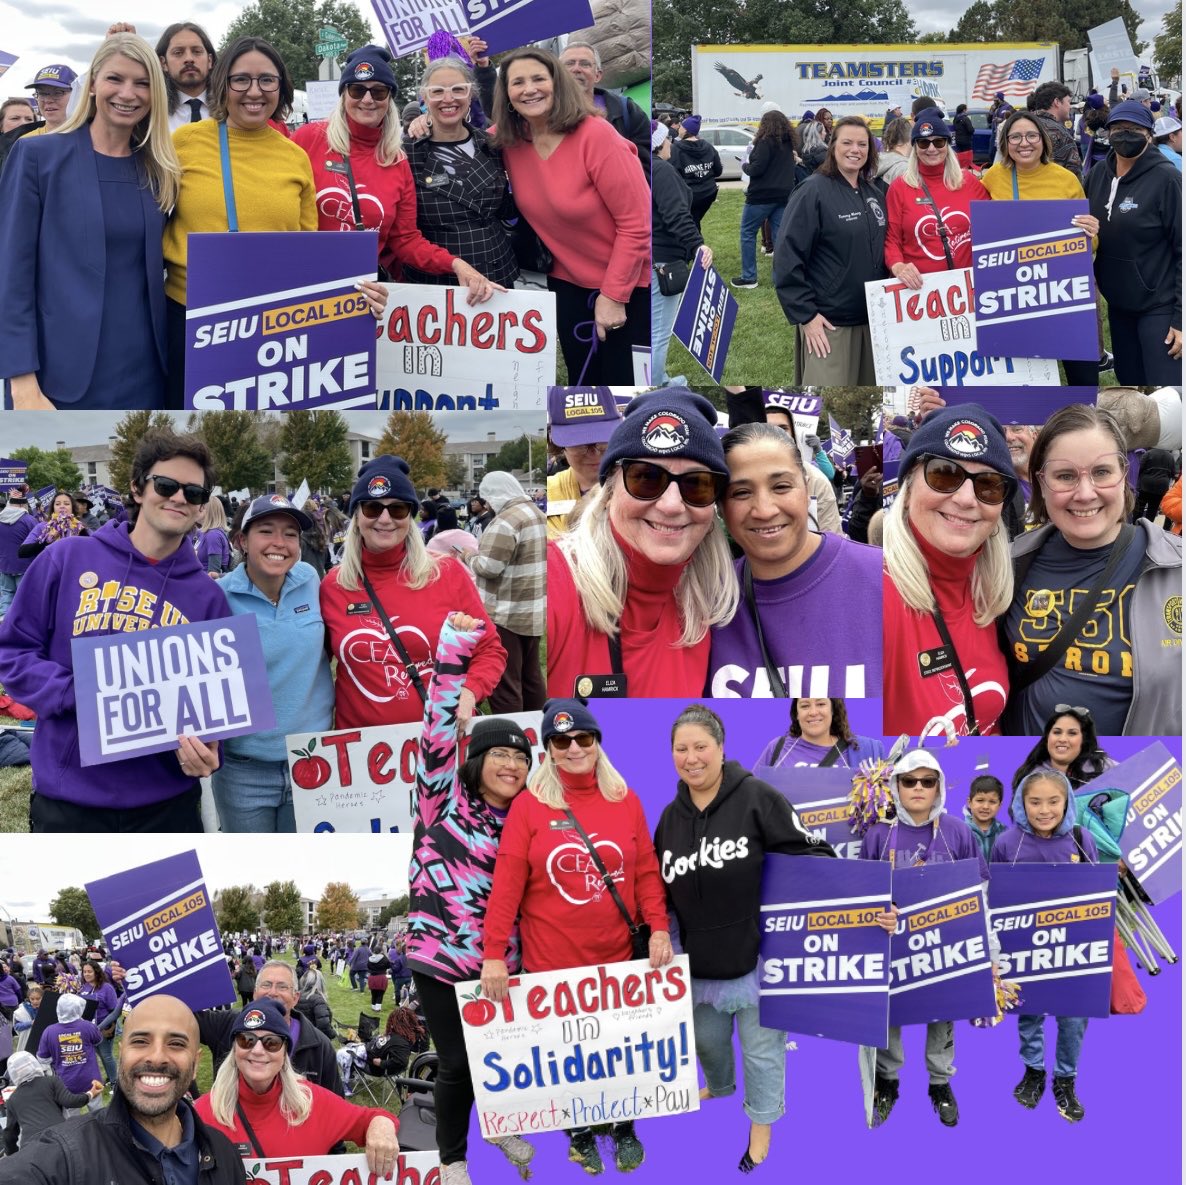 Joined thousands of striking @SEIU105 healthcare workers fighting for fair wages and + staffing so they can care for us all. @COWINS_union ⁦@Teamsters455⁩ @SmartUnion9 @AFLCIOCO @ColoradoEA #coleg